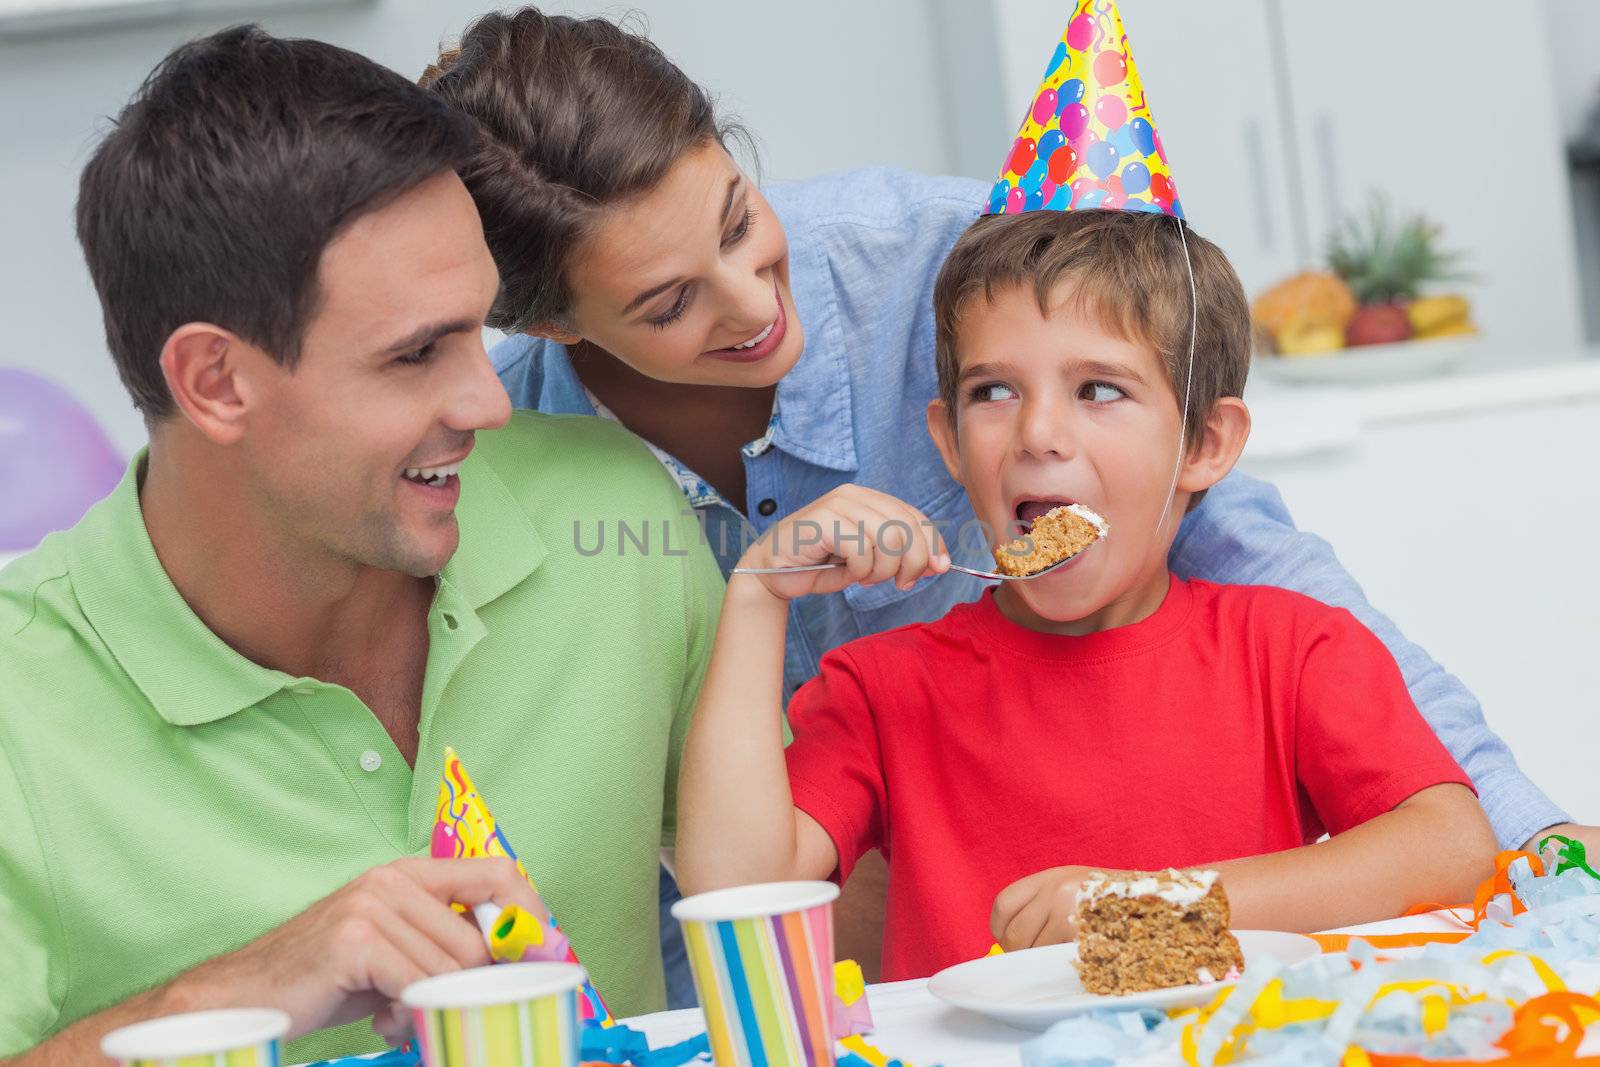 Little boy eating a birthday cake with parents during his birthday party